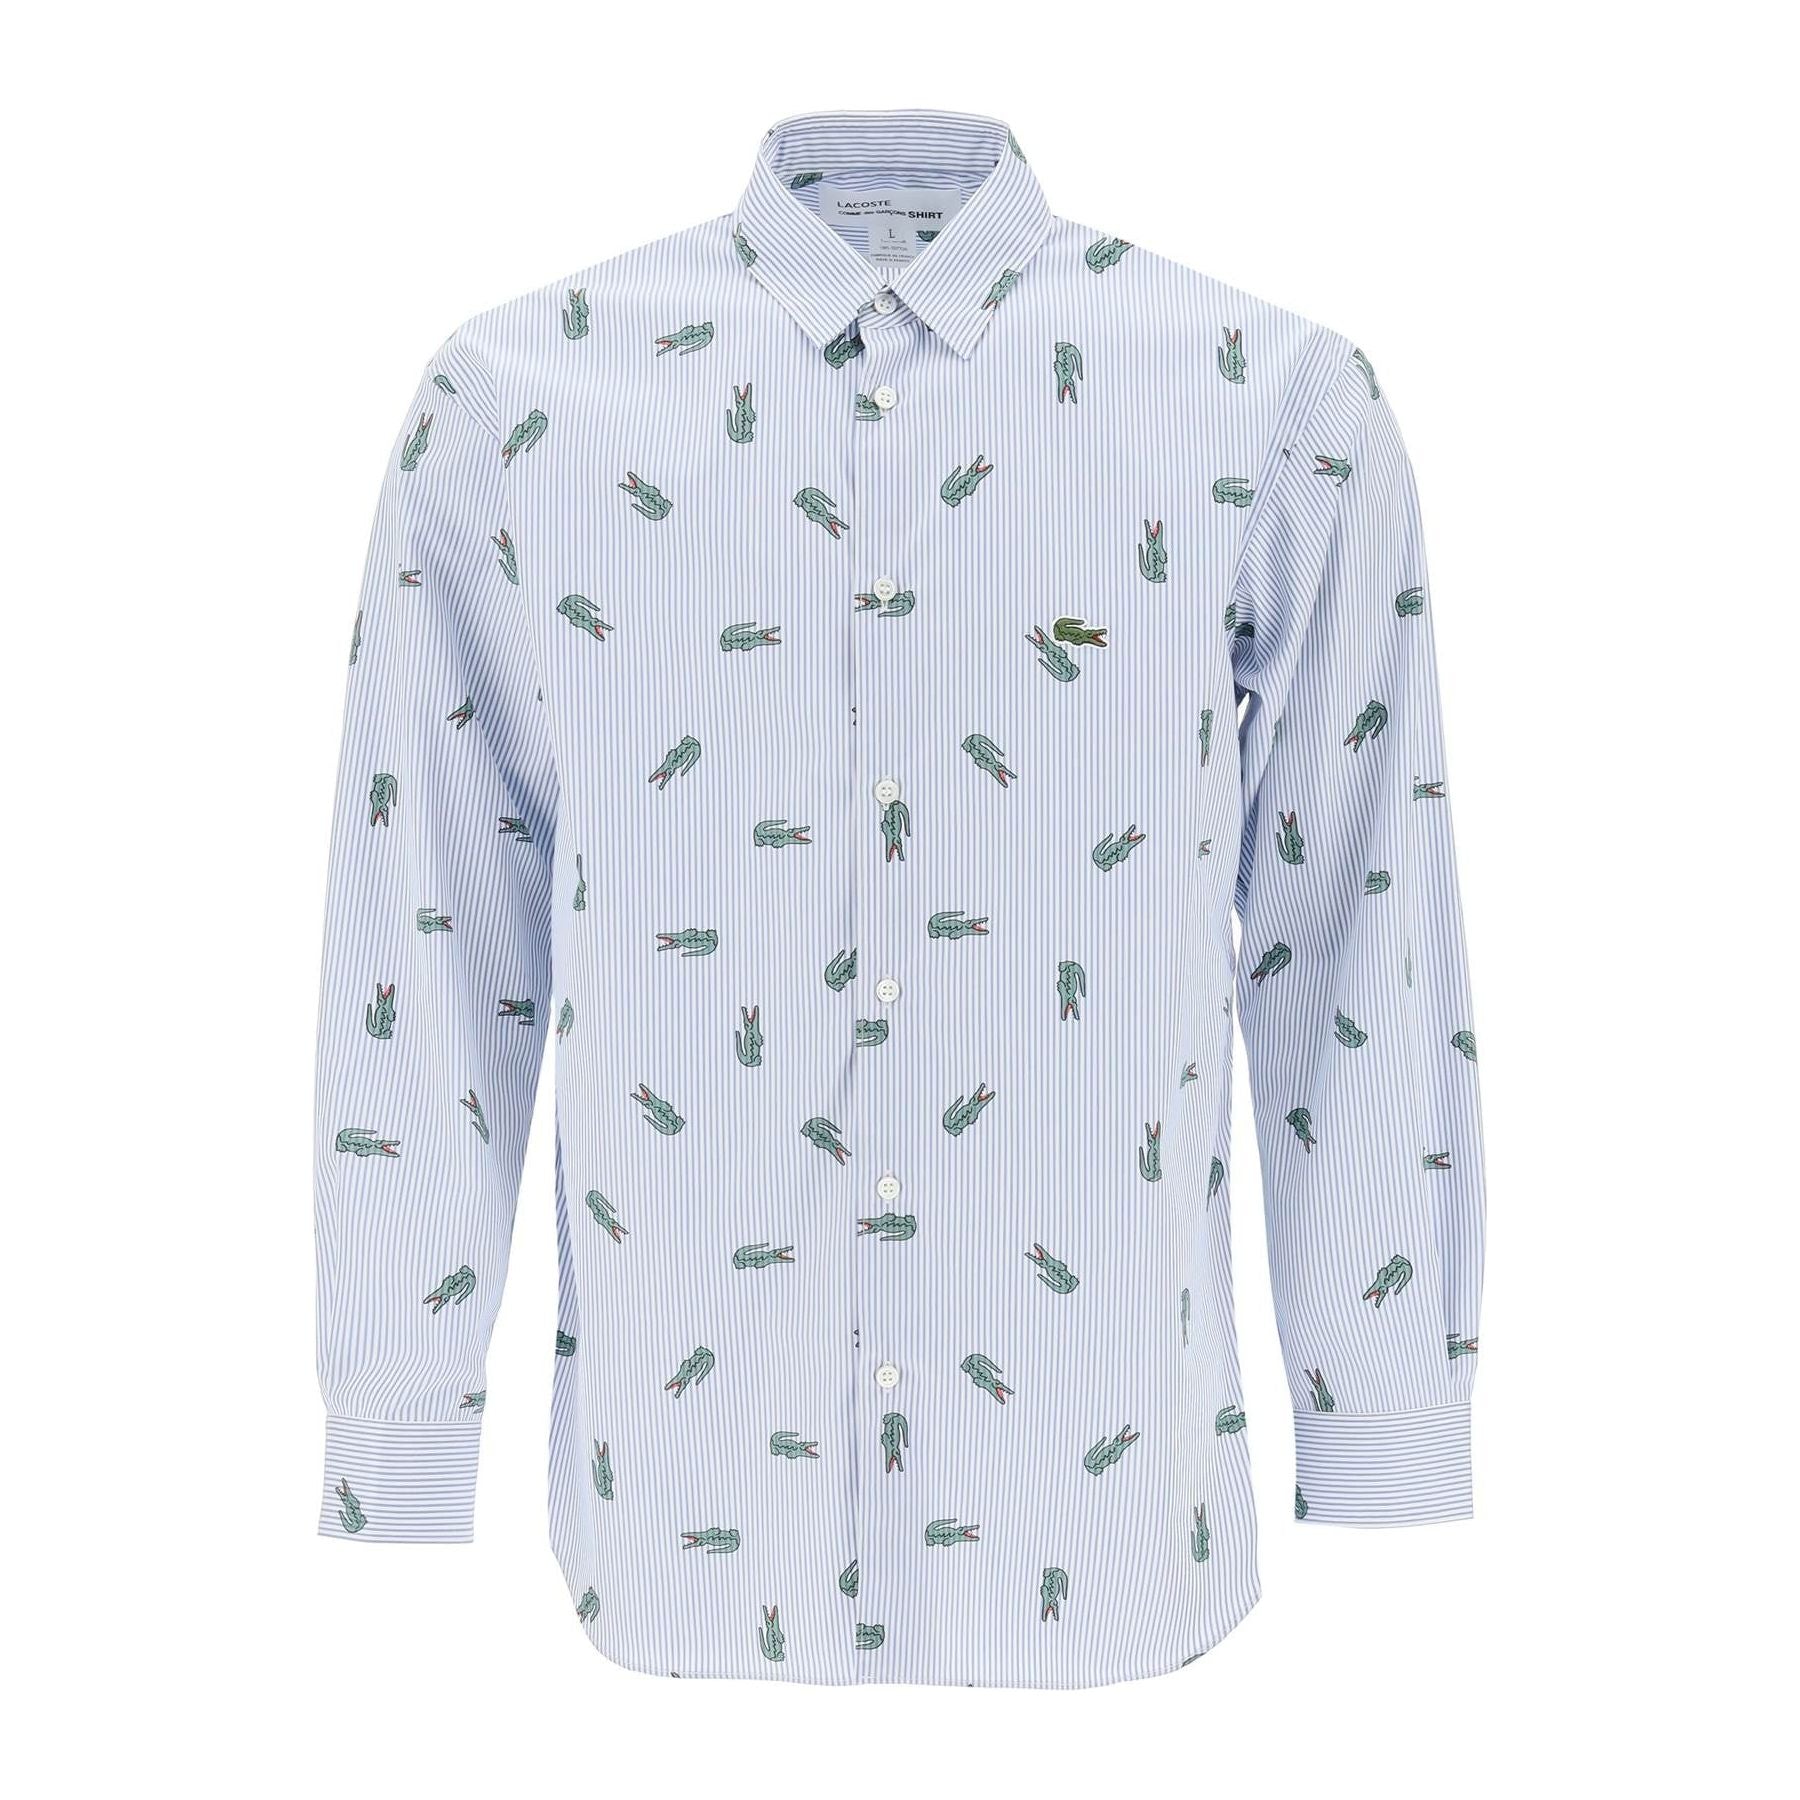 X Lacoste Oxford Shirt With Crocodile Motif